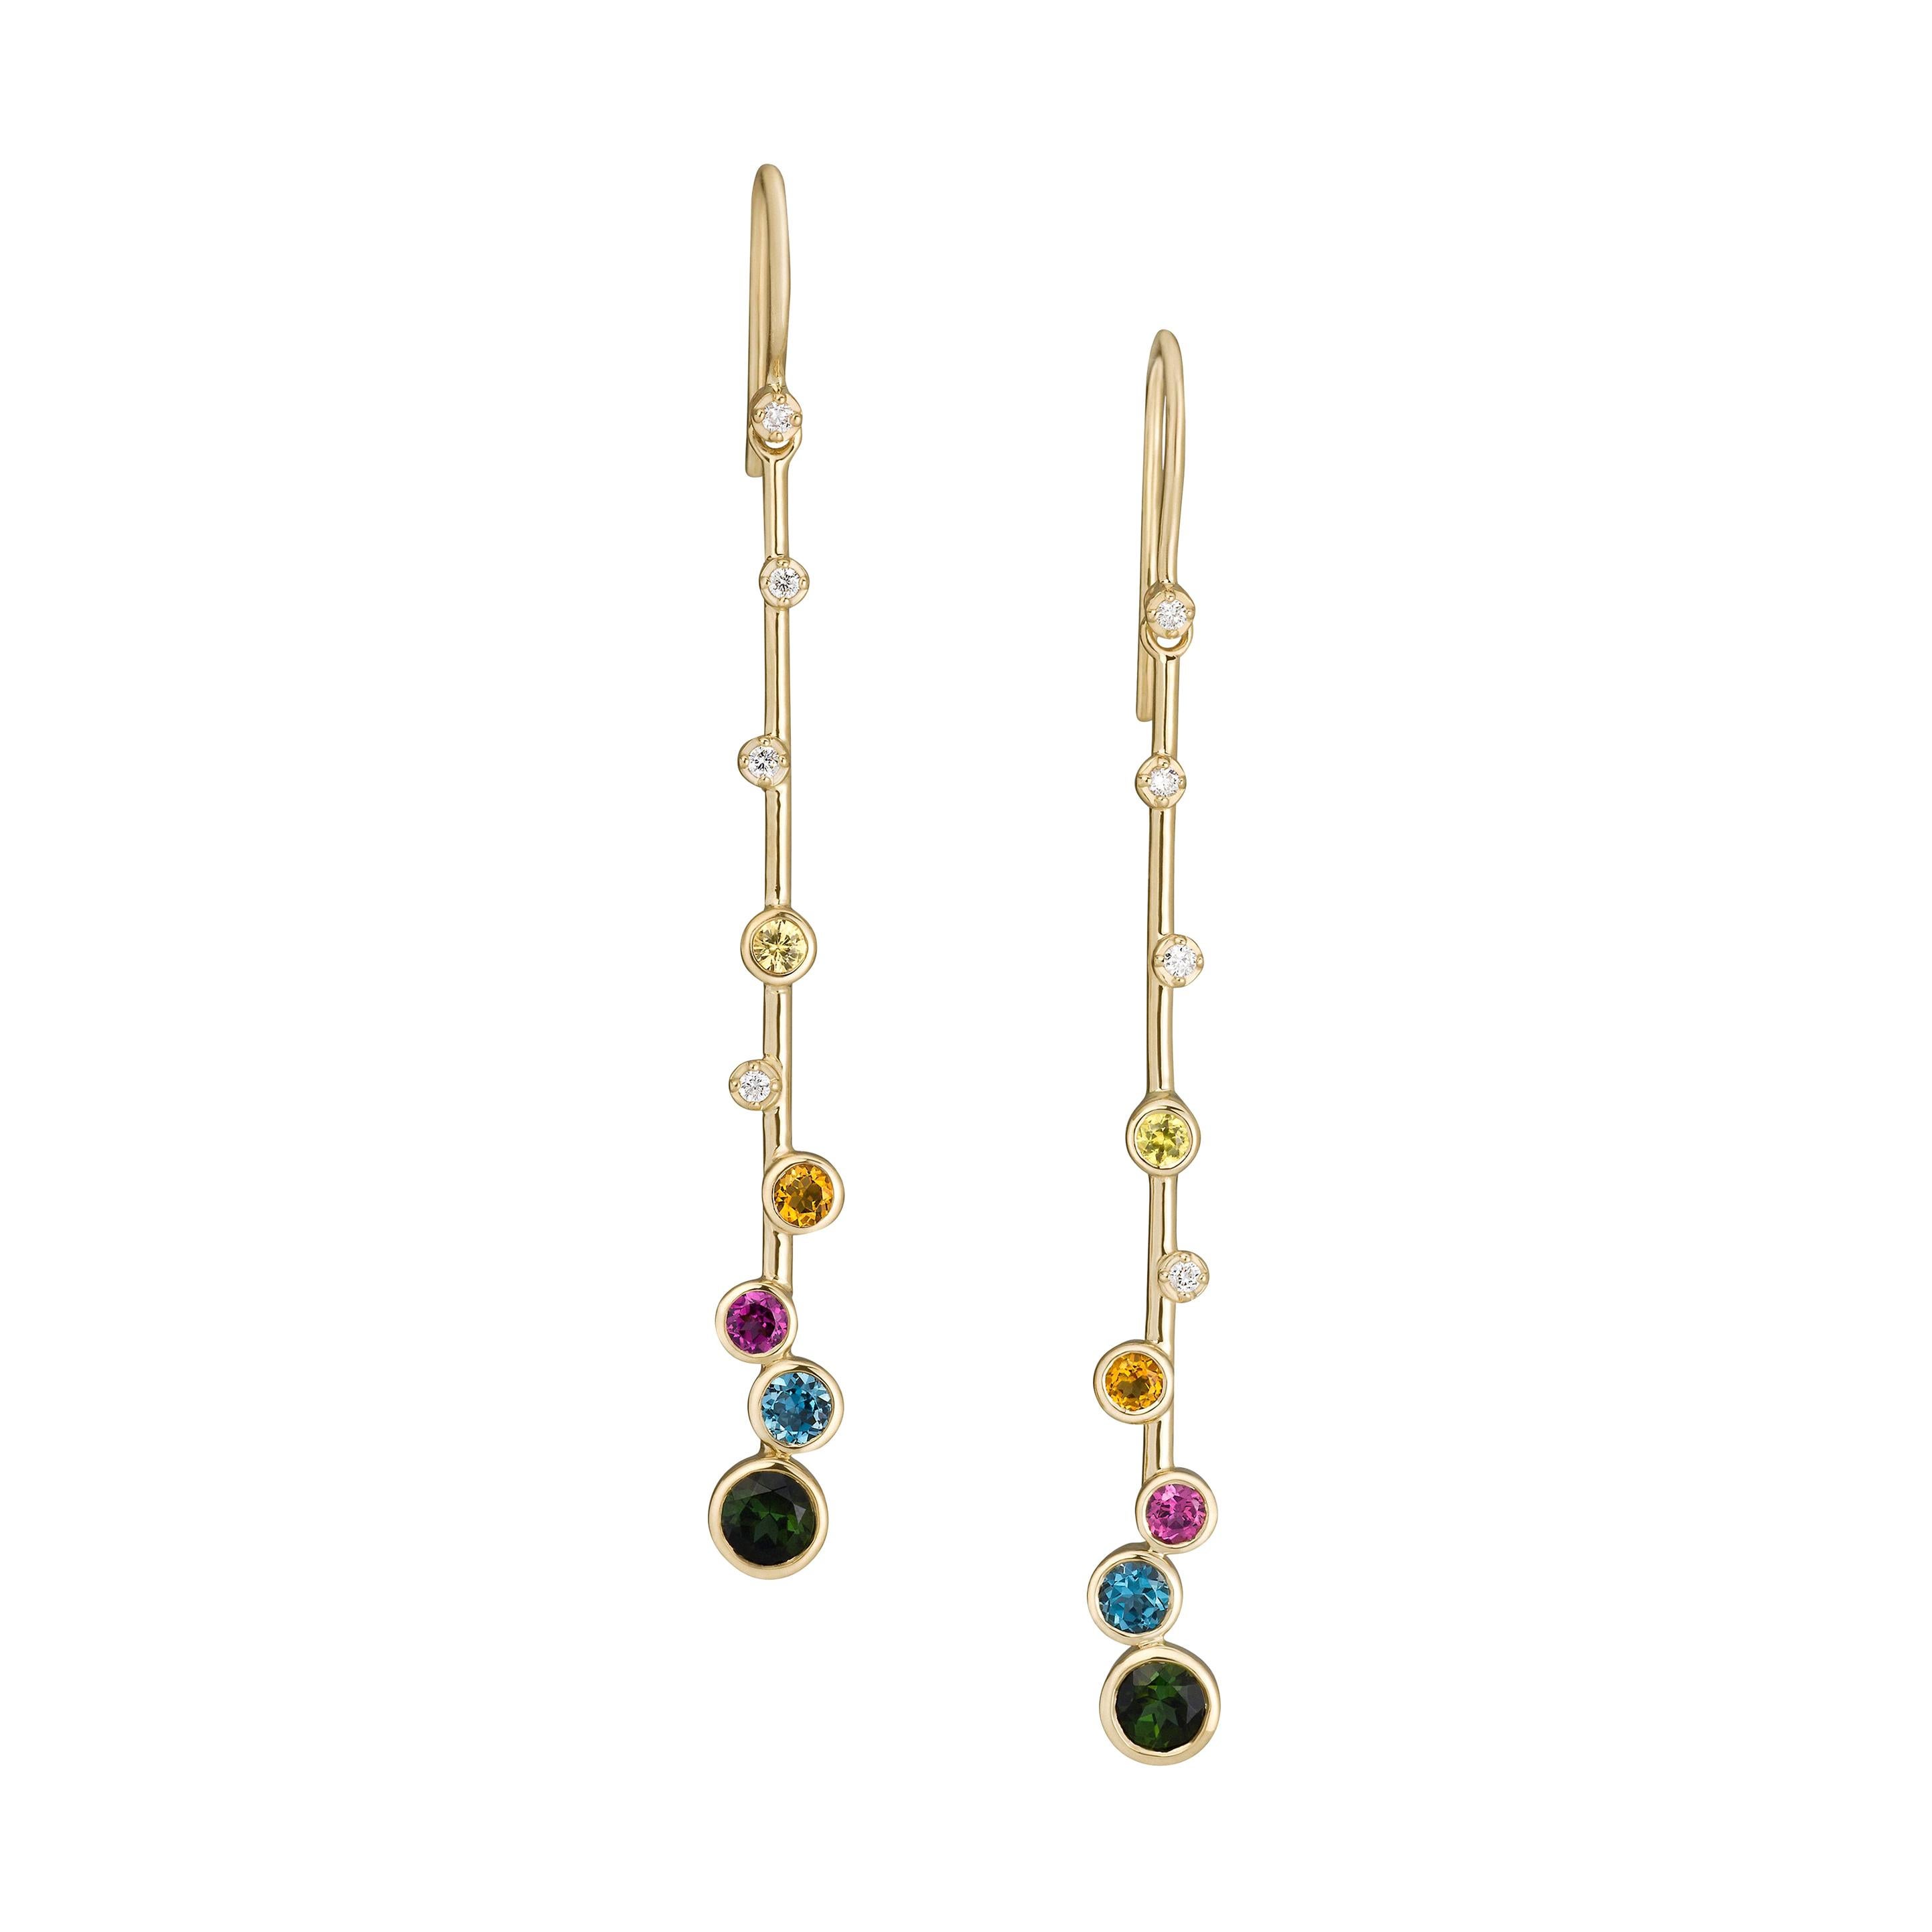 Elongated Multi-Color Gemstone Constellation Earrings in 14k Gold with Diamonds